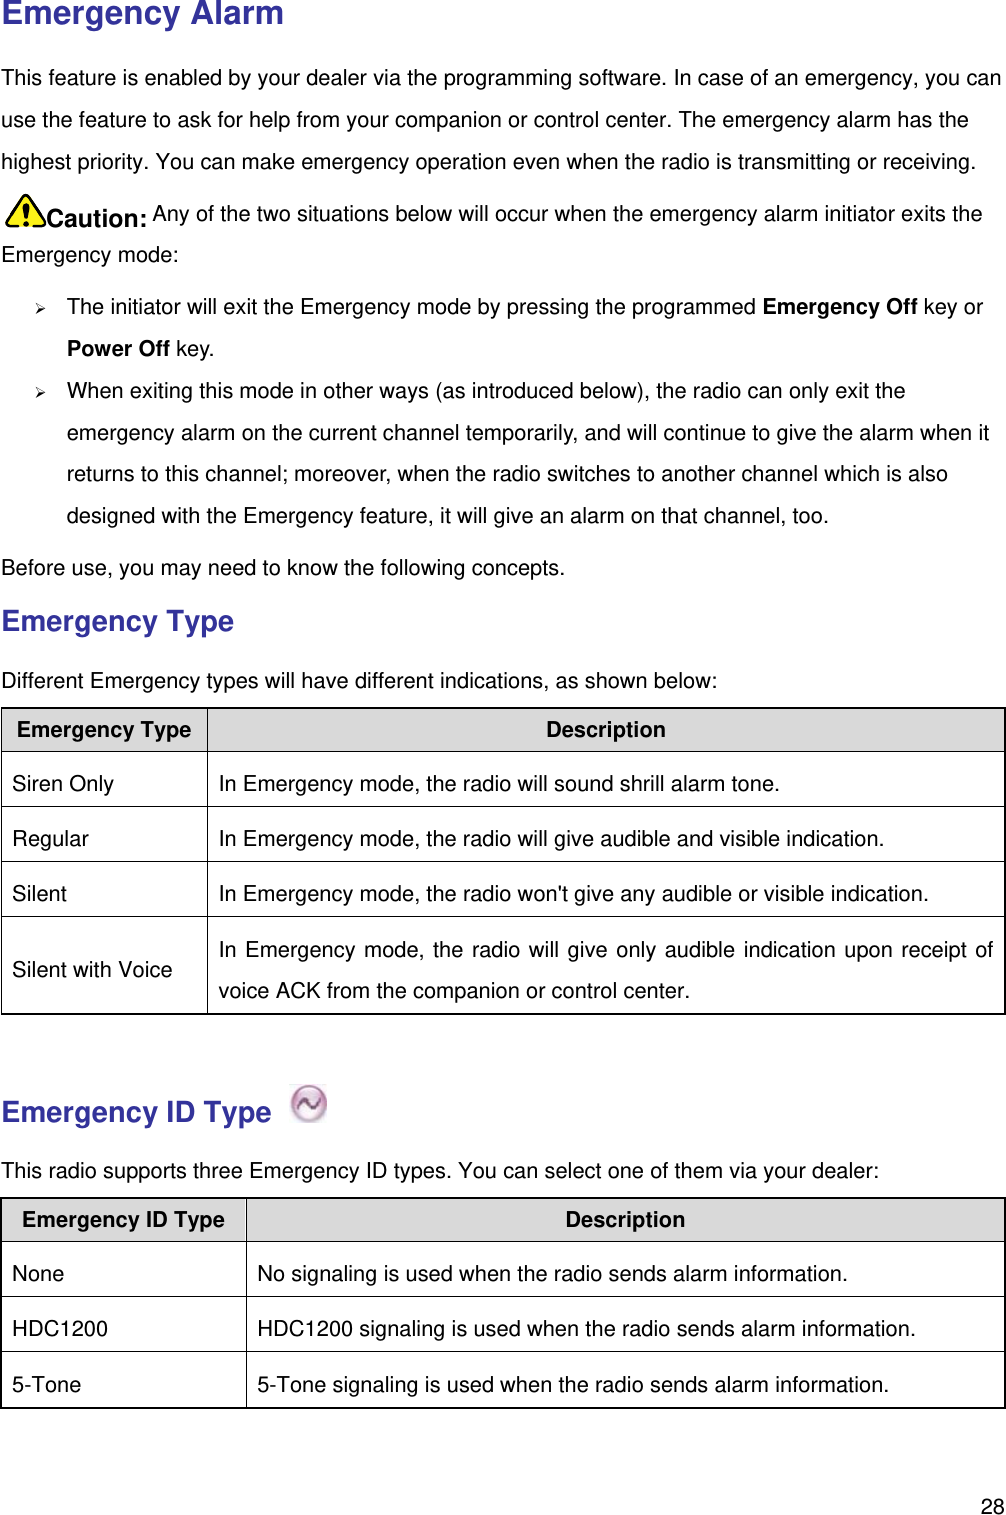   28Emergency Alarm This feature is enabled by your dealer via the programming software. In case of an emergency, you can use the feature to ask for help from your companion or control center. The emergency alarm has the highest priority. You can make emergency operation even when the radio is transmitting or receiving.   Caution: Any of the two situations below will occur when the emergency alarm initiator exits the Emergency mode:    The initiator will exit the Emergency mode by pressing the programmed Emergency Off key or Power Off key.    When exiting this mode in other ways (as introduced below), the radio can only exit the emergency alarm on the current channel temporarily, and will continue to give the alarm when it returns to this channel; moreover, when the radio switches to another channel which is also designed with the Emergency feature, it will give an alarm on that channel, too.   Before use, you may need to know the following concepts.   Emergency Type Different Emergency types will have different indications, as shown below:   Emergency Type  Description Siren Only  In Emergency mode, the radio will sound shrill alarm tone.   Regular  In Emergency mode, the radio will give audible and visible indication.   Silent  In Emergency mode, the radio won&apos;t give any audible or visible indication.   Silent with Voice  In Emergency mode, the radio will give only audible indication upon receipt of voice ACK from the companion or control center.    Emergency ID Type   This radio supports three Emergency ID types. You can select one of them via your dealer:   Emergency ID Type  Description None  No signaling is used when the radio sends alarm information. HDC1200  HDC1200 signaling is used when the radio sends alarm information. 5-Tone  5-Tone signaling is used when the radio sends alarm information.  